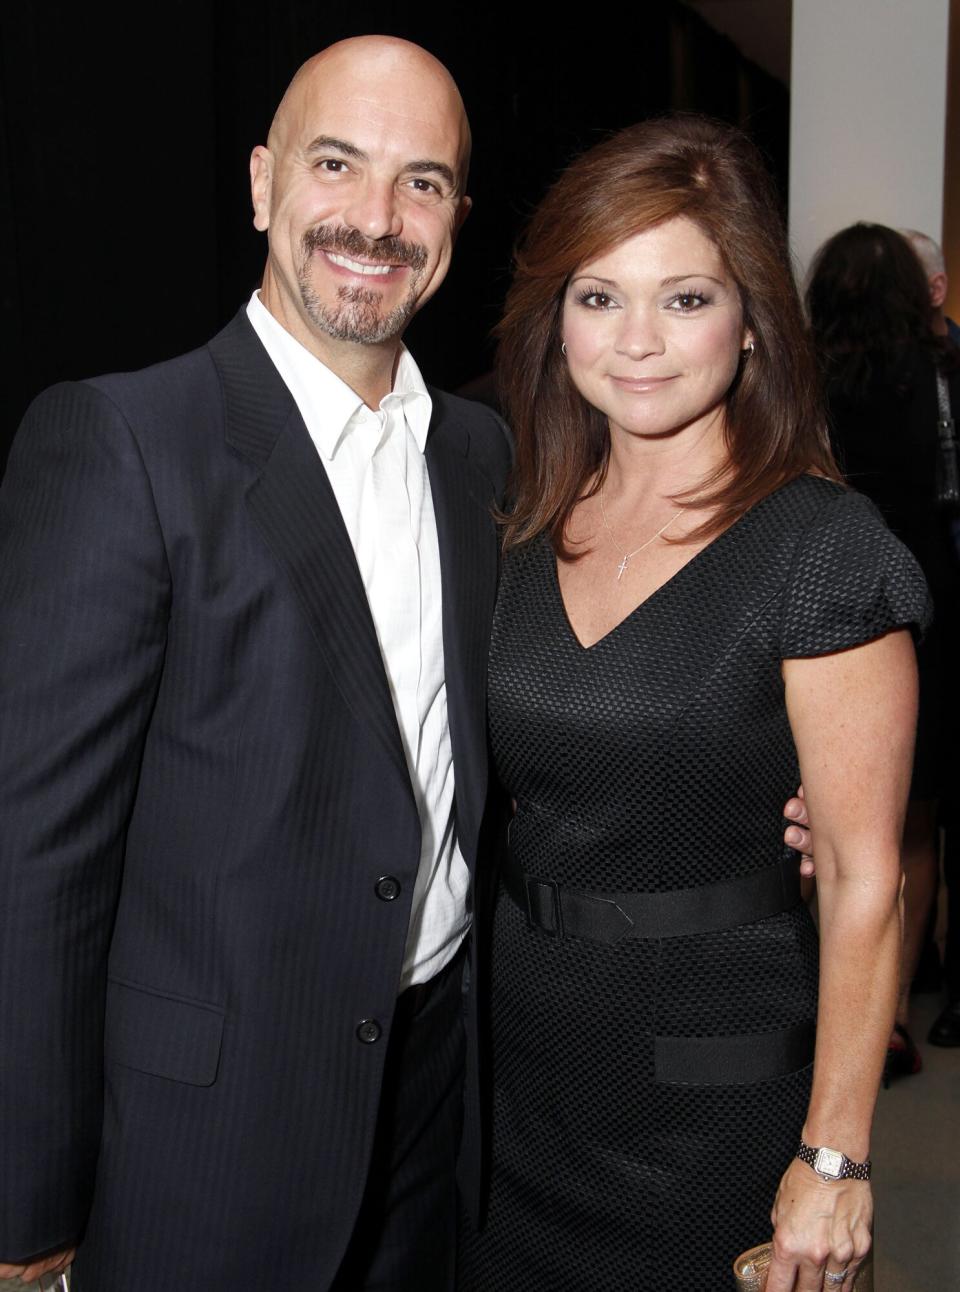 Tom Vitale and actress Valeri Bertinelli attends Fashion For Life 2009 benefit at California Market Center on May 17, 2009 in Los Angeles, California.